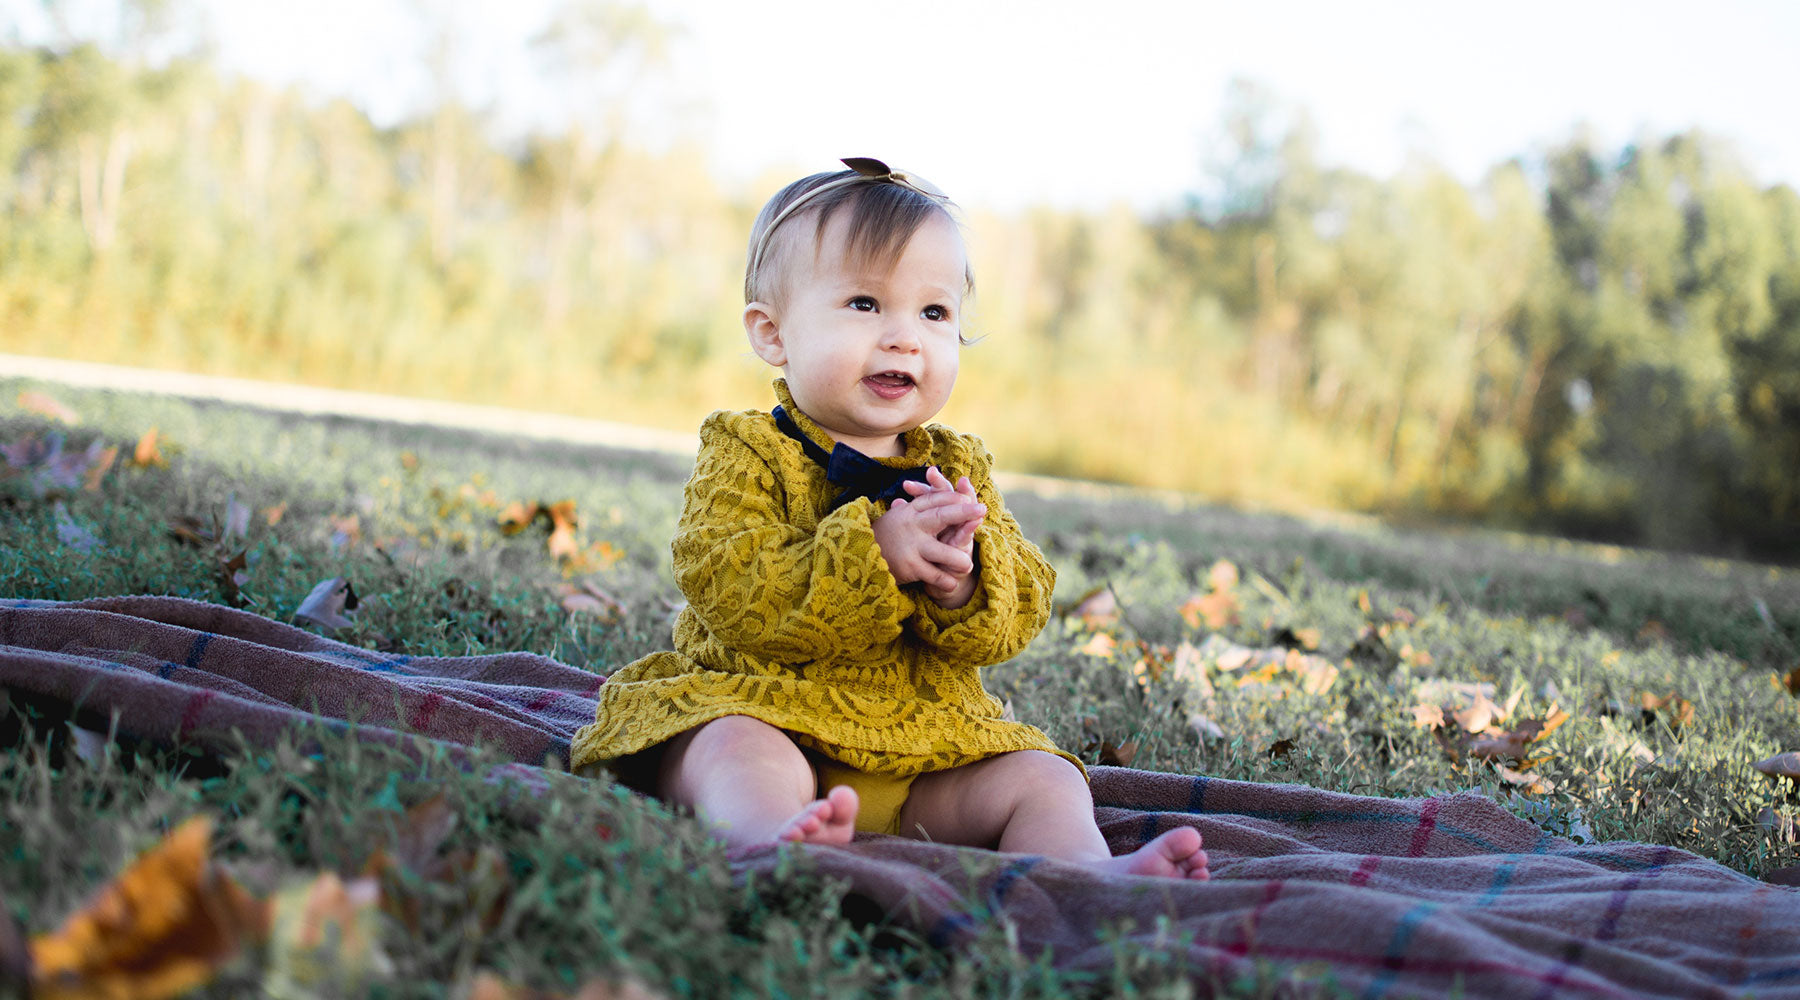 Baby girl sitting on a picnic blanket outdoors